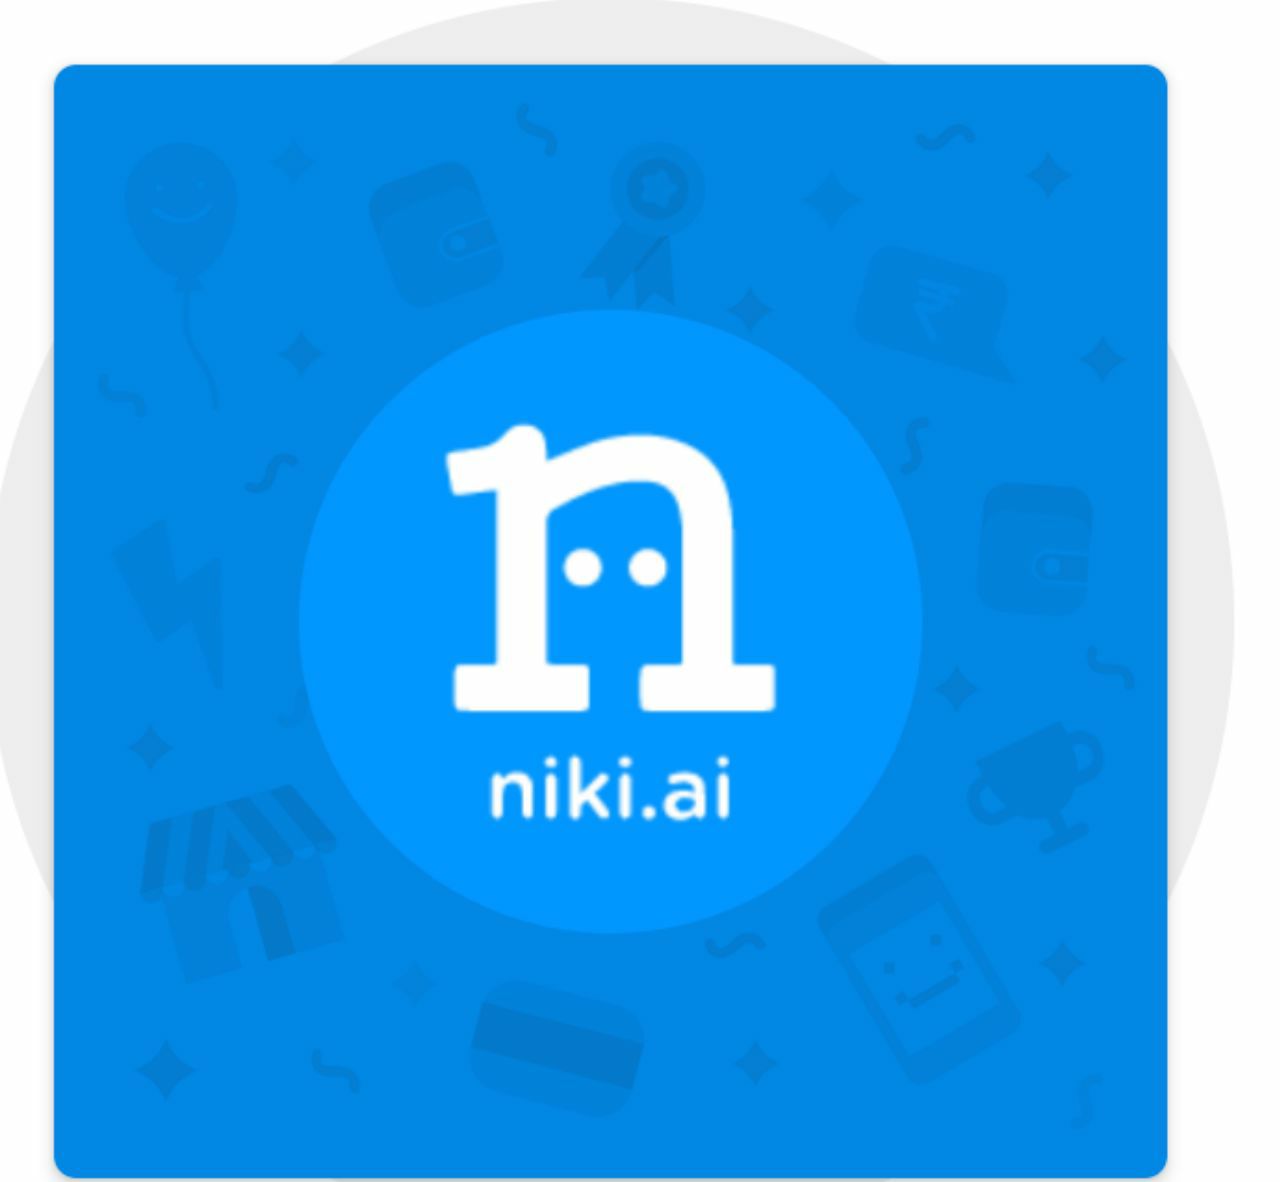 Niki App Recharge Offer - Get Scratch Card Worth Rs.35 to Rs.200 when Spend Rs.200 via Google Pay